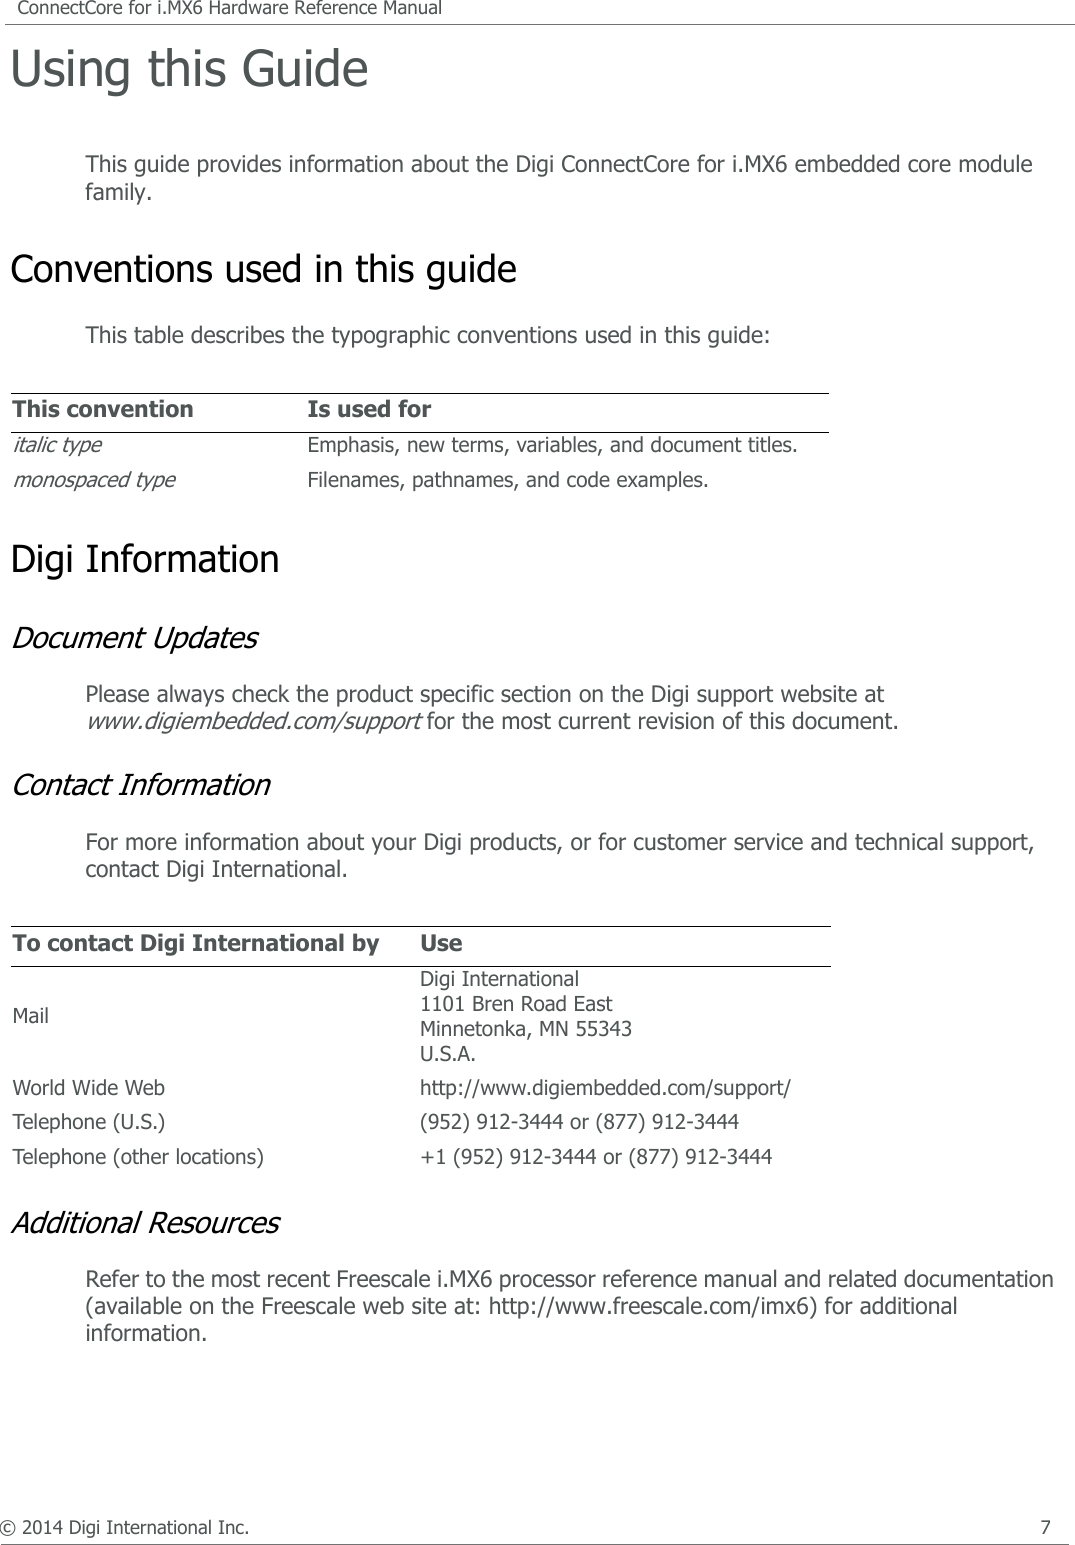 © 2014 Digi International Inc.      7ConnectCore for i.MX6 Hardware Reference ManualUsing this Guide This guide provides information about the Digi ConnectCore for i.MX6 embedded core module family.Conventions used in this guideThis table describes the typographic conventions used in this guide:Digi Information Document UpdatesPlease always check the product specific section on the Digi support website at www.digiembedded.com/support for the most current revision of this document.Contact Information For more information about your Digi products, or for customer service and technical support, contact Digi International.Additional ResourcesRefer to the most recent Freescale i.MX6 processor reference manual and related documentation (available on the Freescale web site at: http://www.freescale.com/imx6) for additional information.This convention Is used foritalic typeEmphasis, new terms, variables, and document titles.monospaced typeFilenames, pathnames, and code examples.To contact Digi International by UseMailDigi International 1101 Bren Road EastMinnetonka, MN 55343U.S.A.World Wide Web http://www.digiembedded.com/support/Telephone (U.S.) (952) 912-3444 or (877) 912-3444Telephone (other locations) +1 (952) 912-3444 or (877) 912-3444